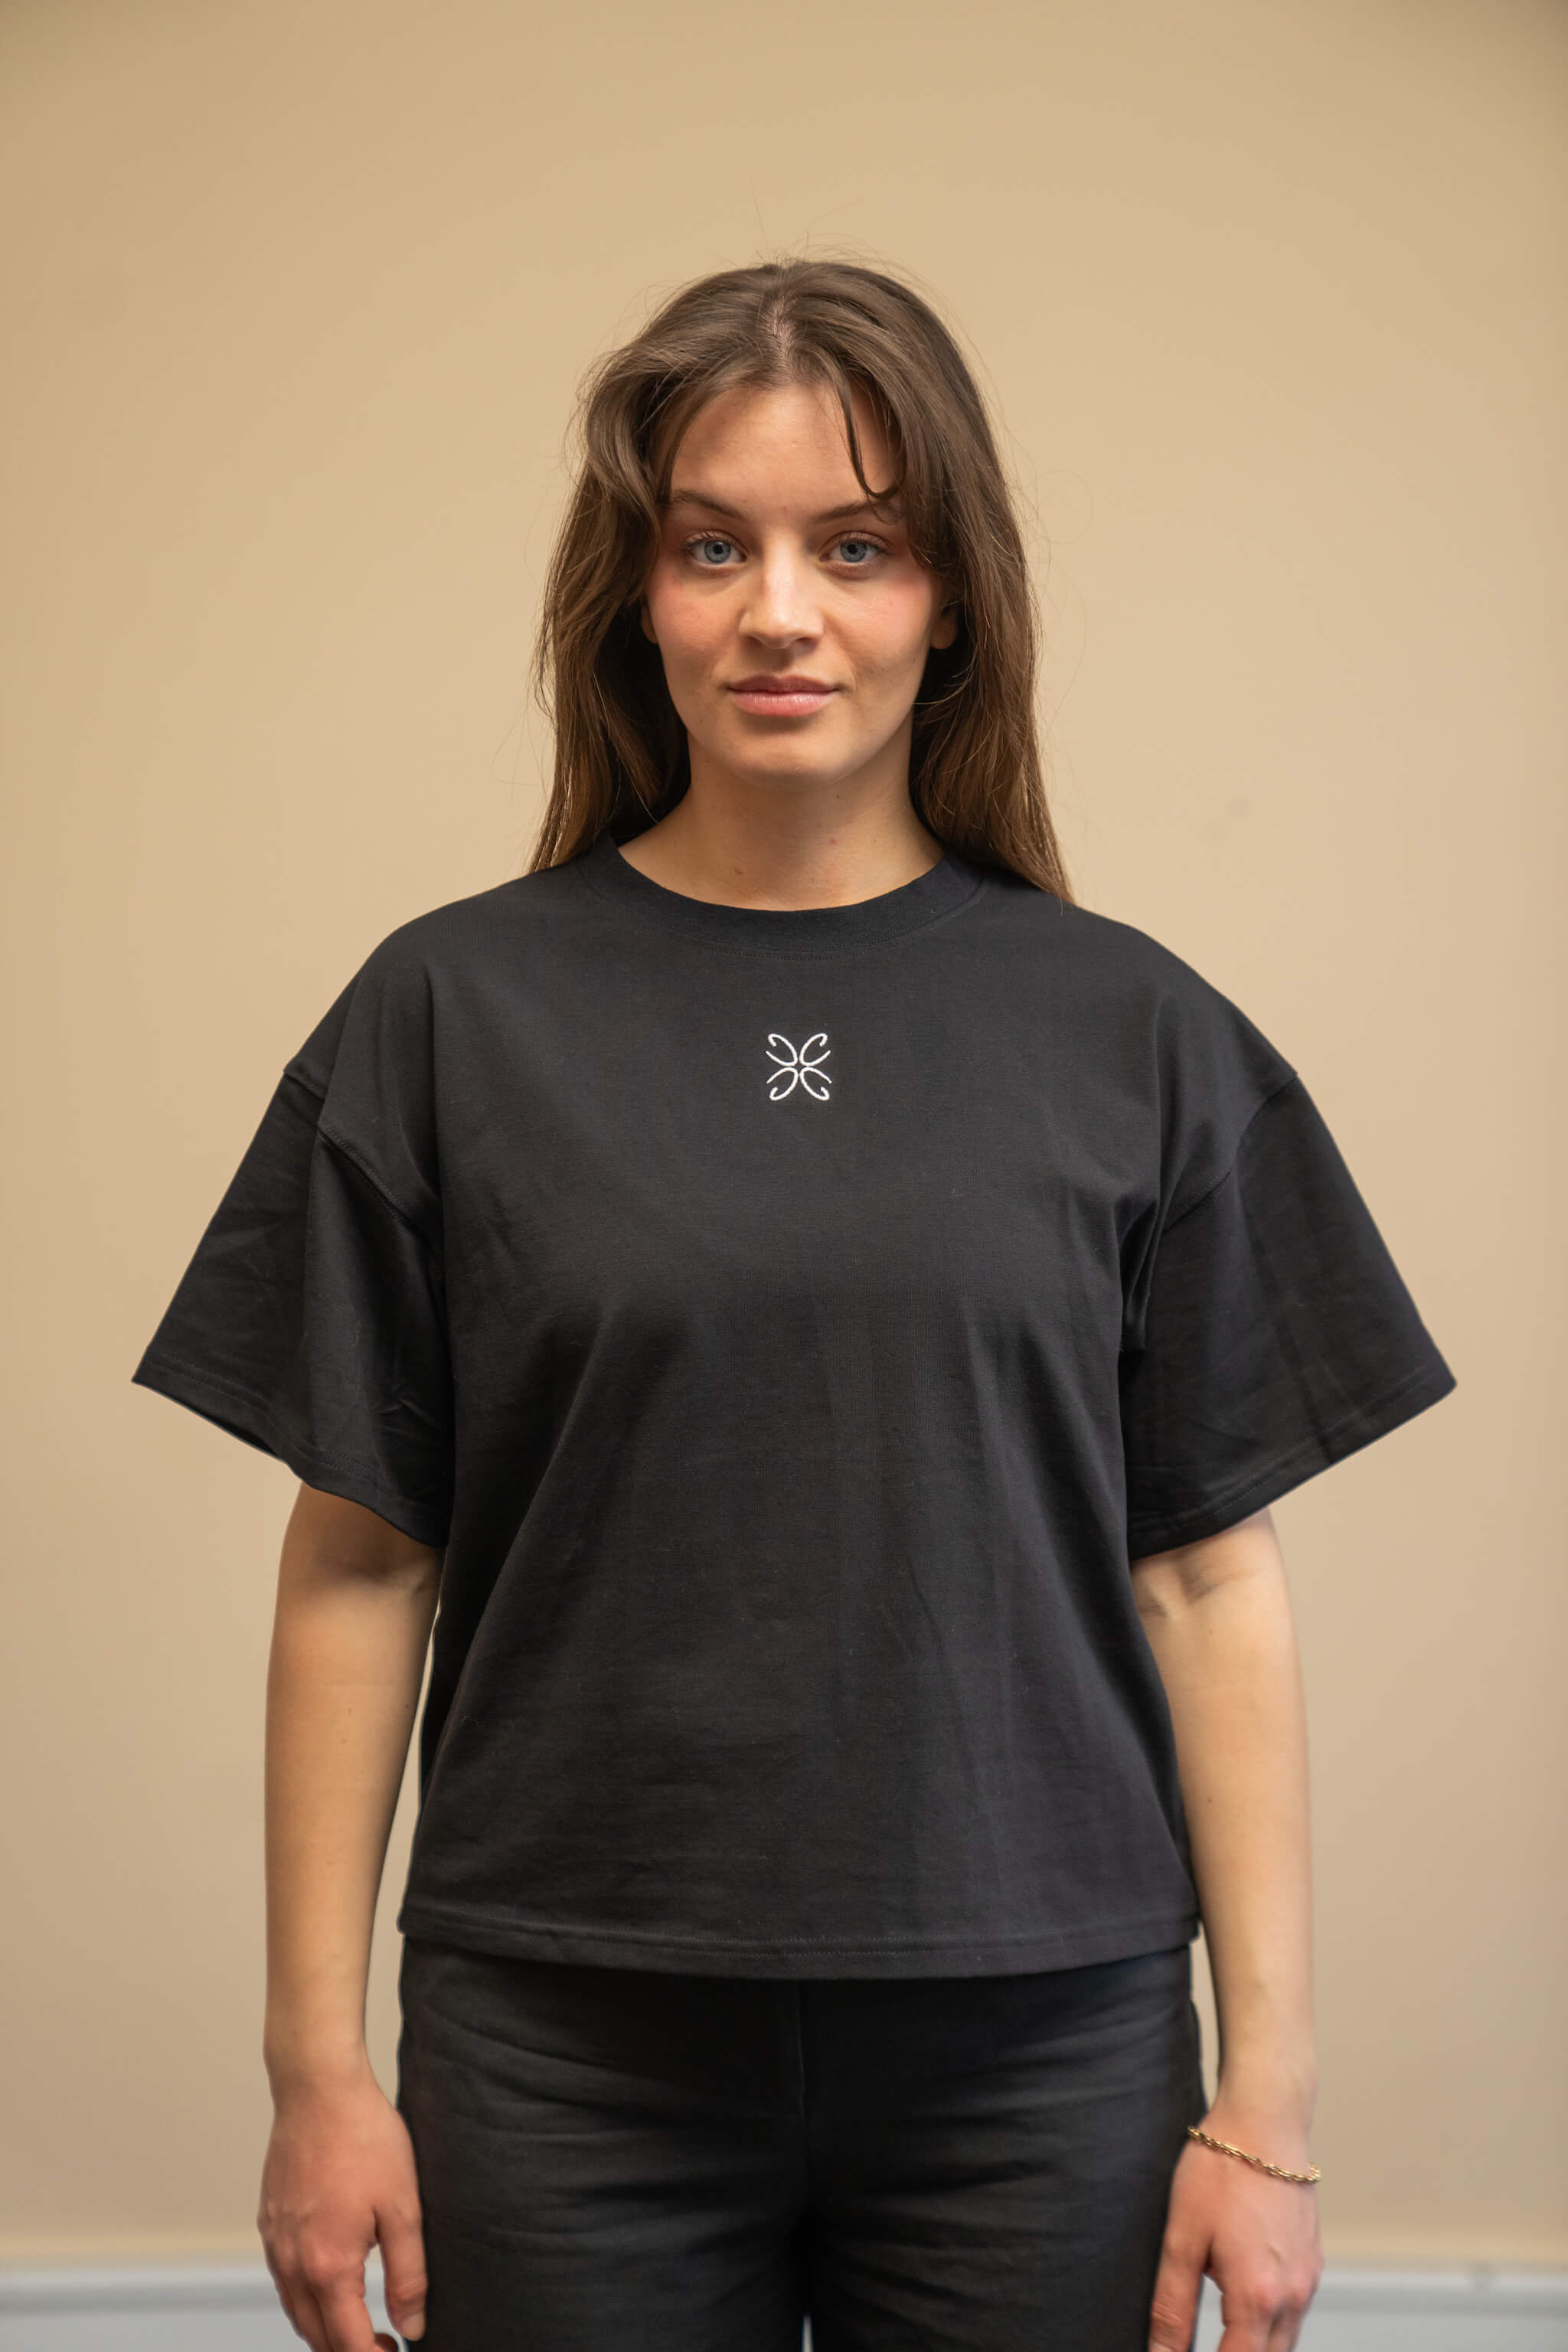 Woman wearing a black t-shirt from Cyme Copenhagen's spring/summer collection. The t-shirt features a simple, elegant design with a white logo in the center. The model stands against a neutral background, emphasizing the minimalist and stylish appeal of the garment.